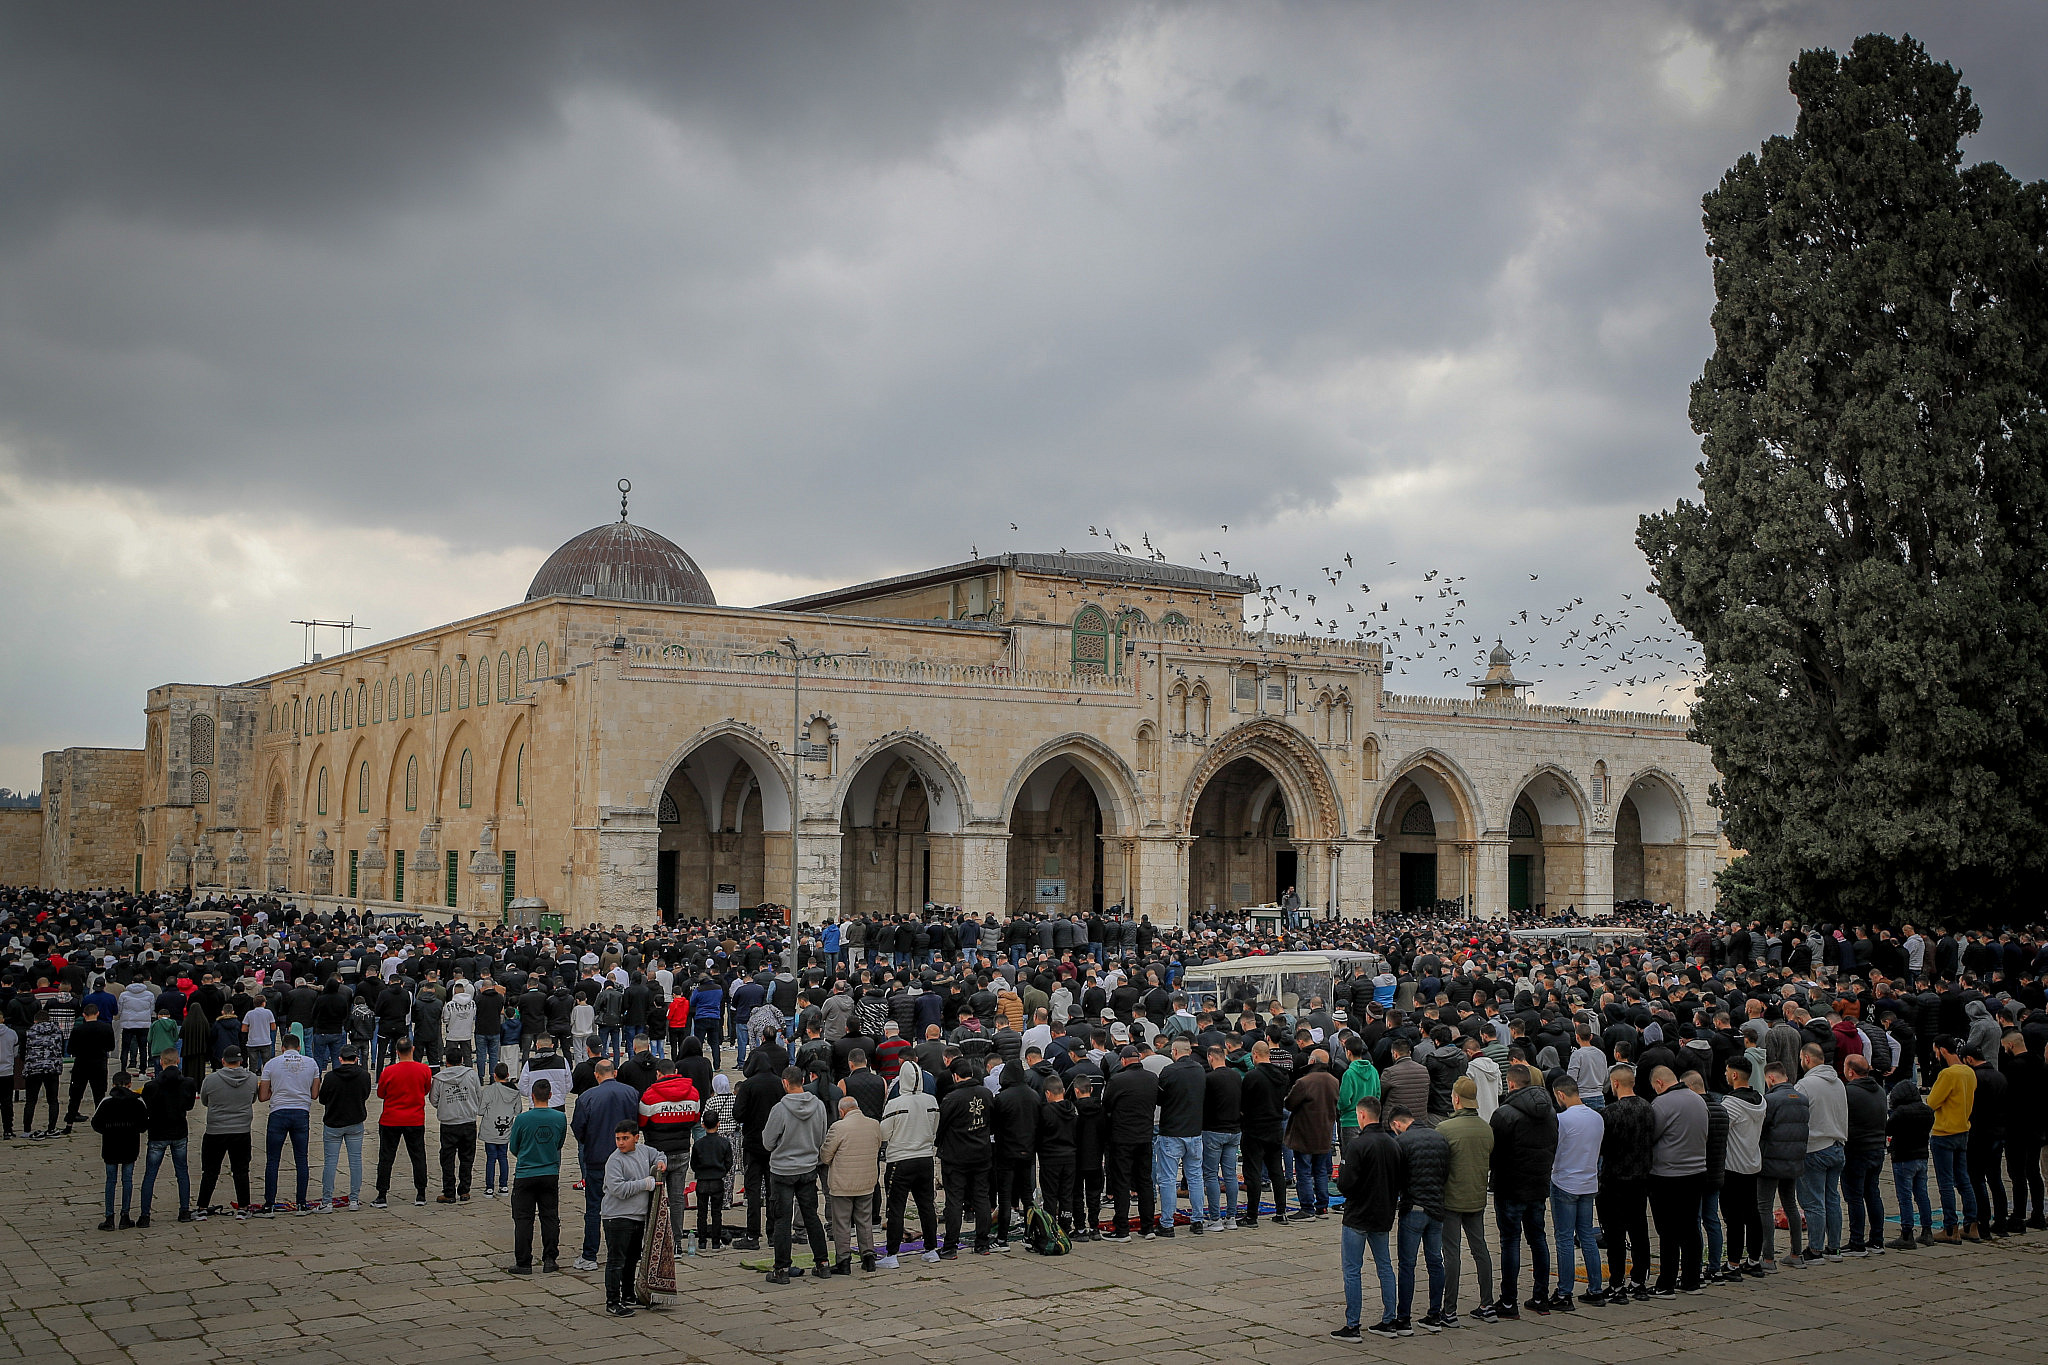 Palestinians attend Friday prayers at the Al-Aqsa Mosque compound in the Old City of Jerusalem, February 24, 2023. (Jamal Awad/Flash90)